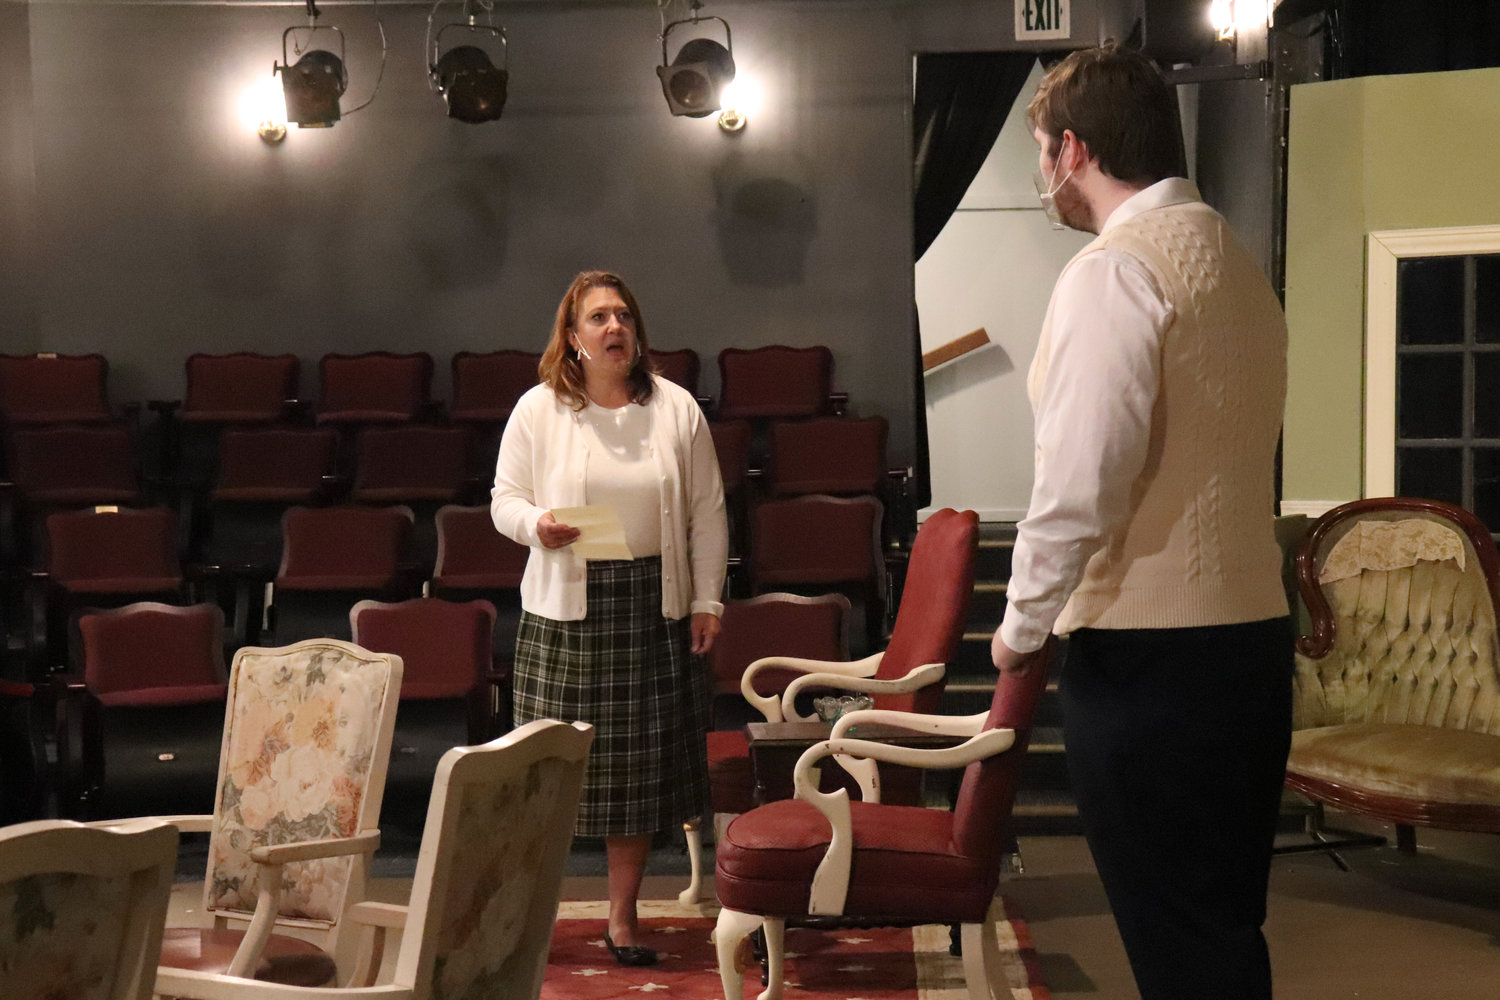 Michelle Koenen as Letitia Blacklock performs opposite of Sean Patrick-McNeal as Patrick Simmons on stage during a rehearsal of “A Murder is Announced” at Evergreen Playhouse last week.